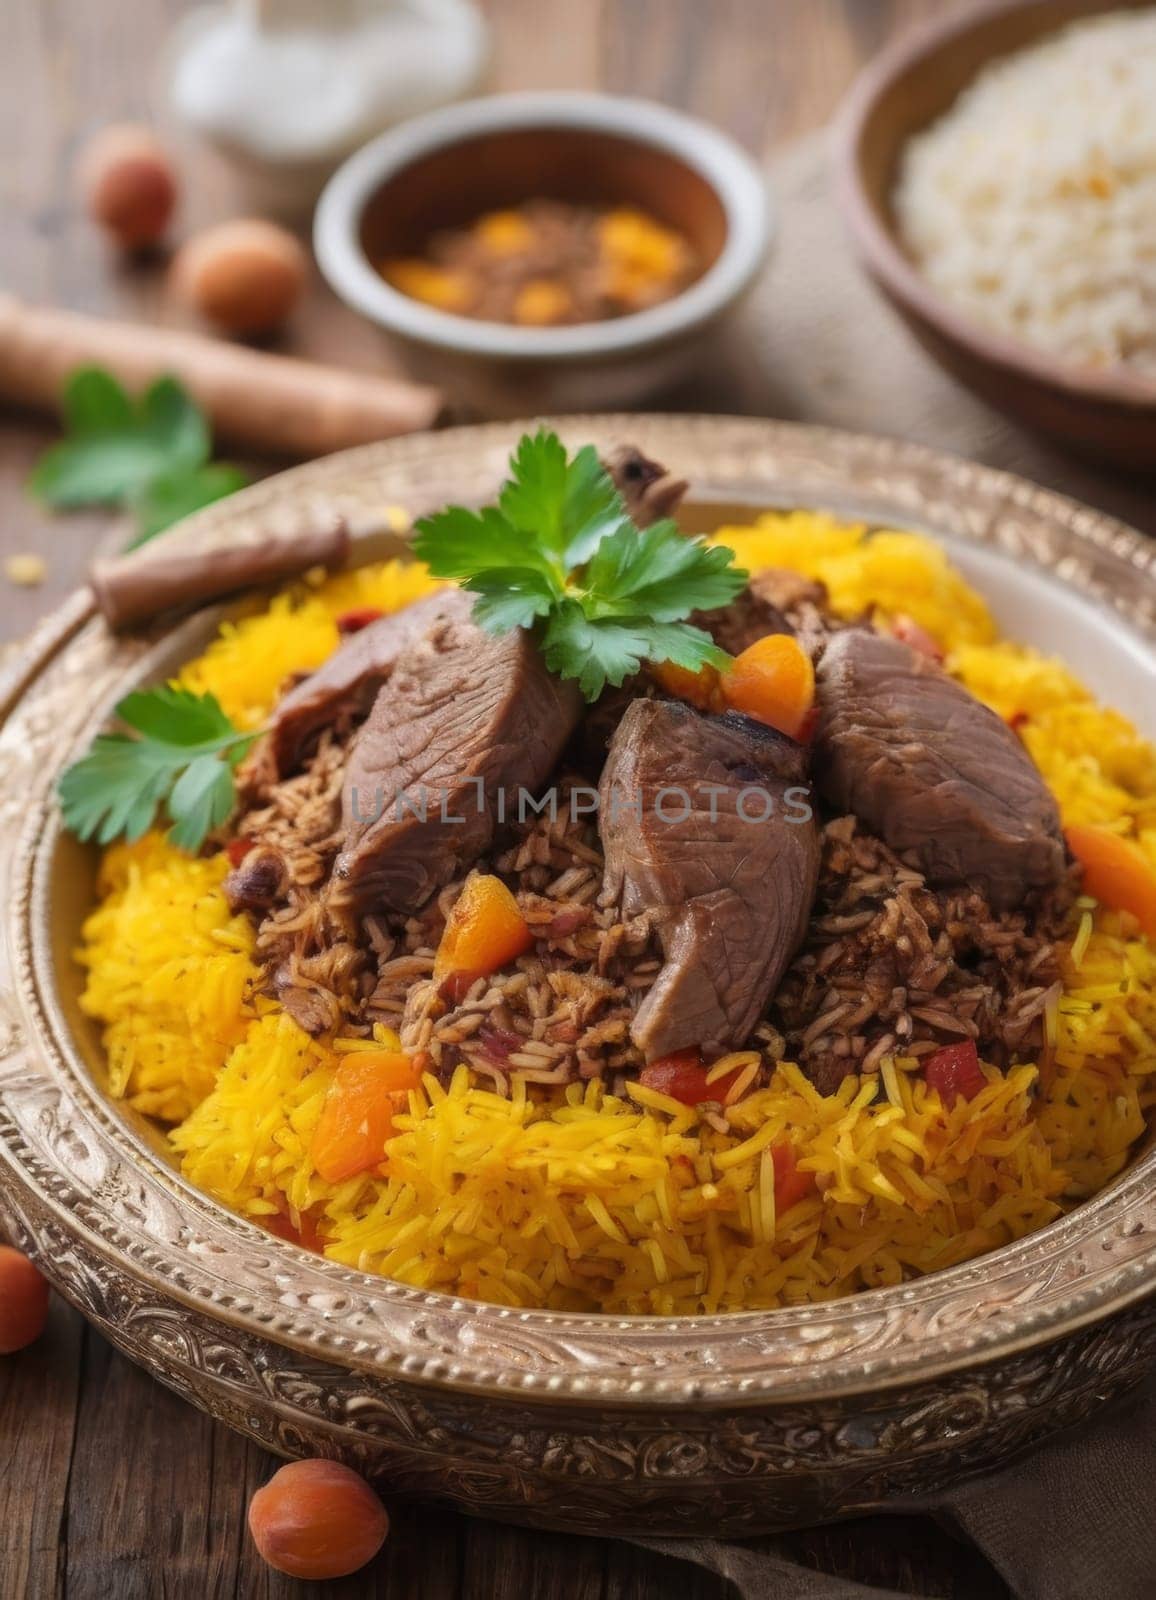 Authentic Azerbaijani plov, a traditional rice pilaf dish featuring fragrant saffron-infused rice, tender lamb, and sweet apricots, elegantly presented in an ornate serving dish